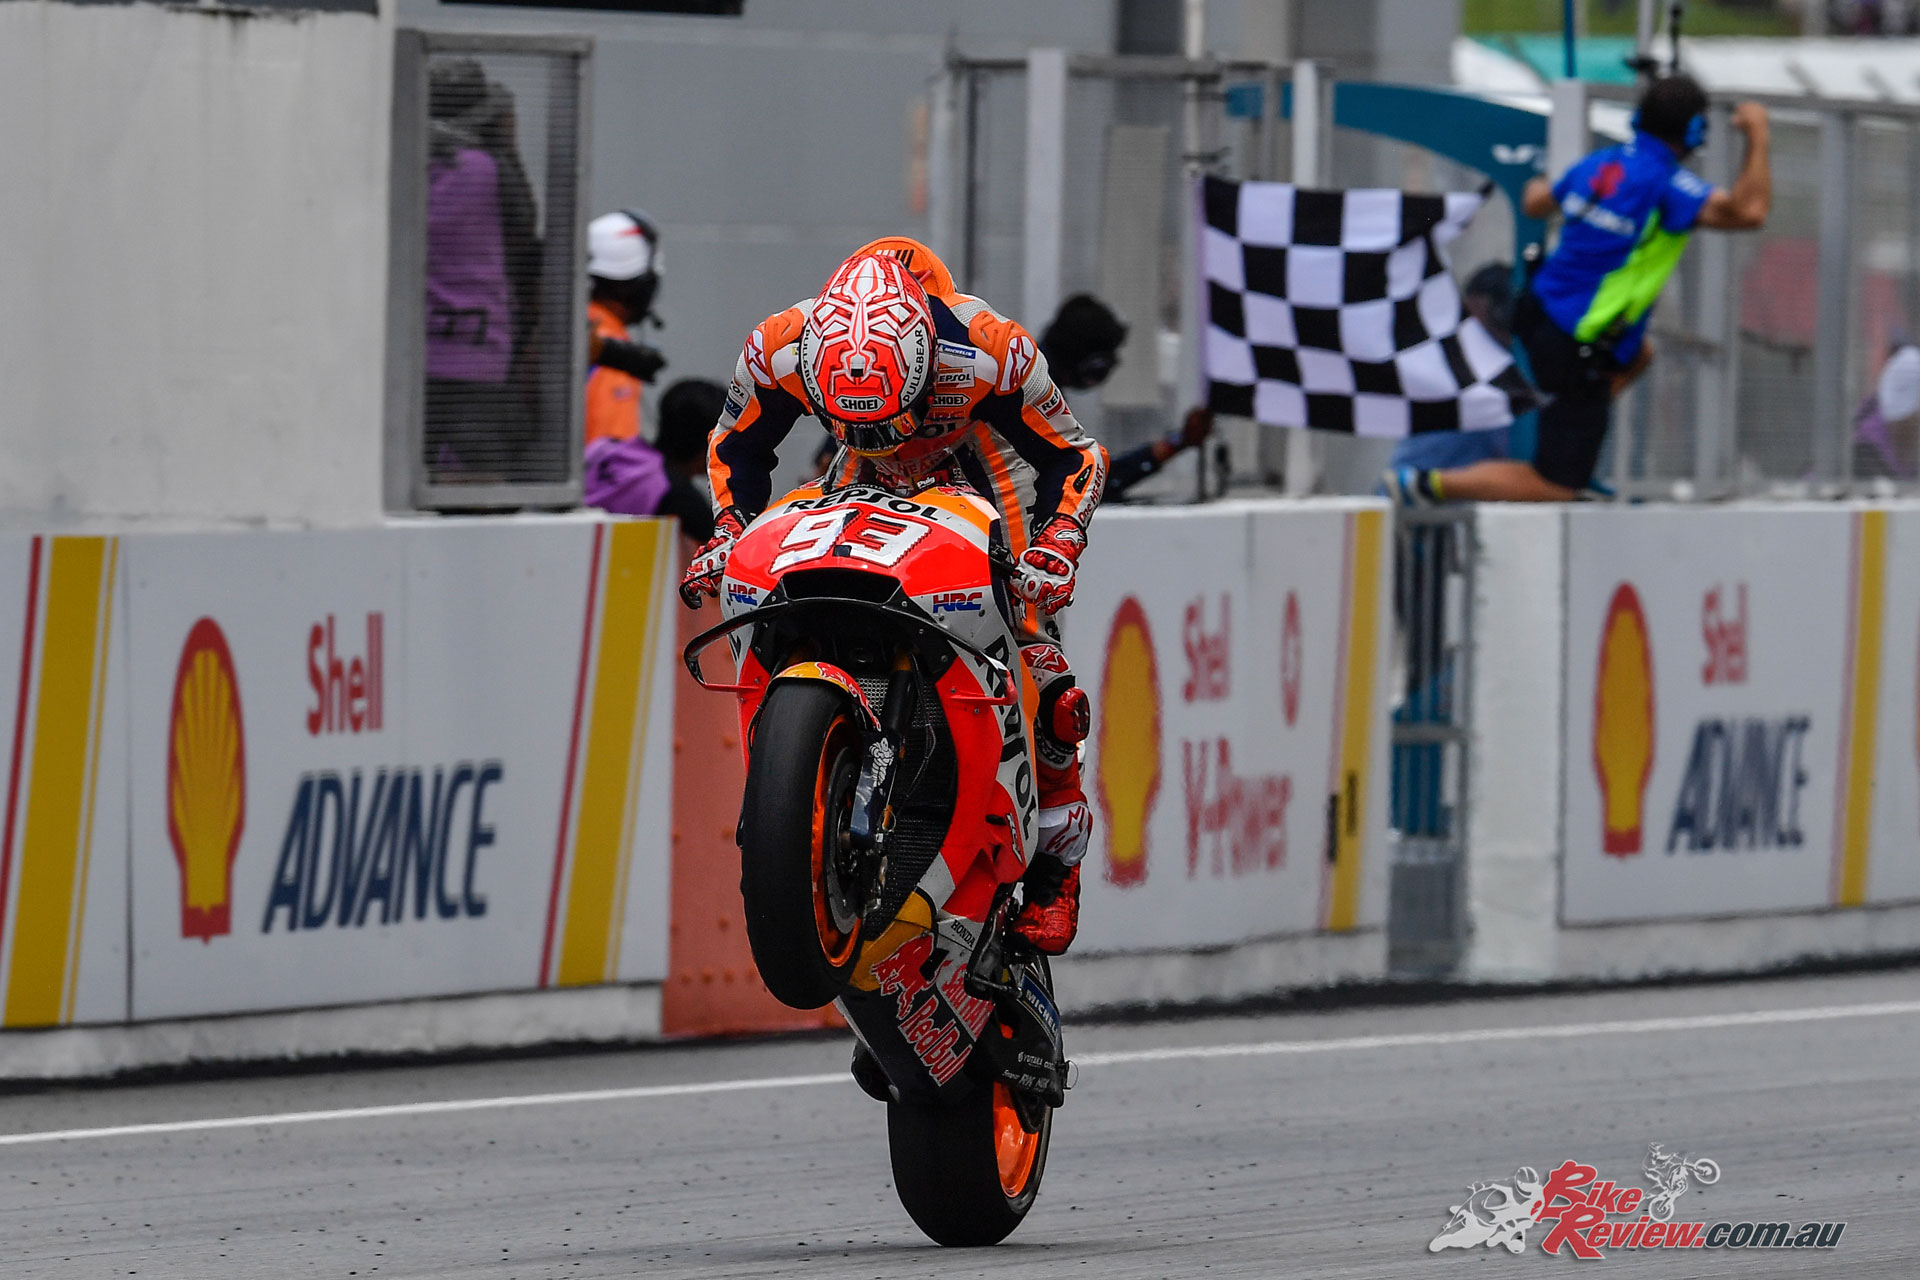 Being Marc Márquez - This Is How I Win My Race